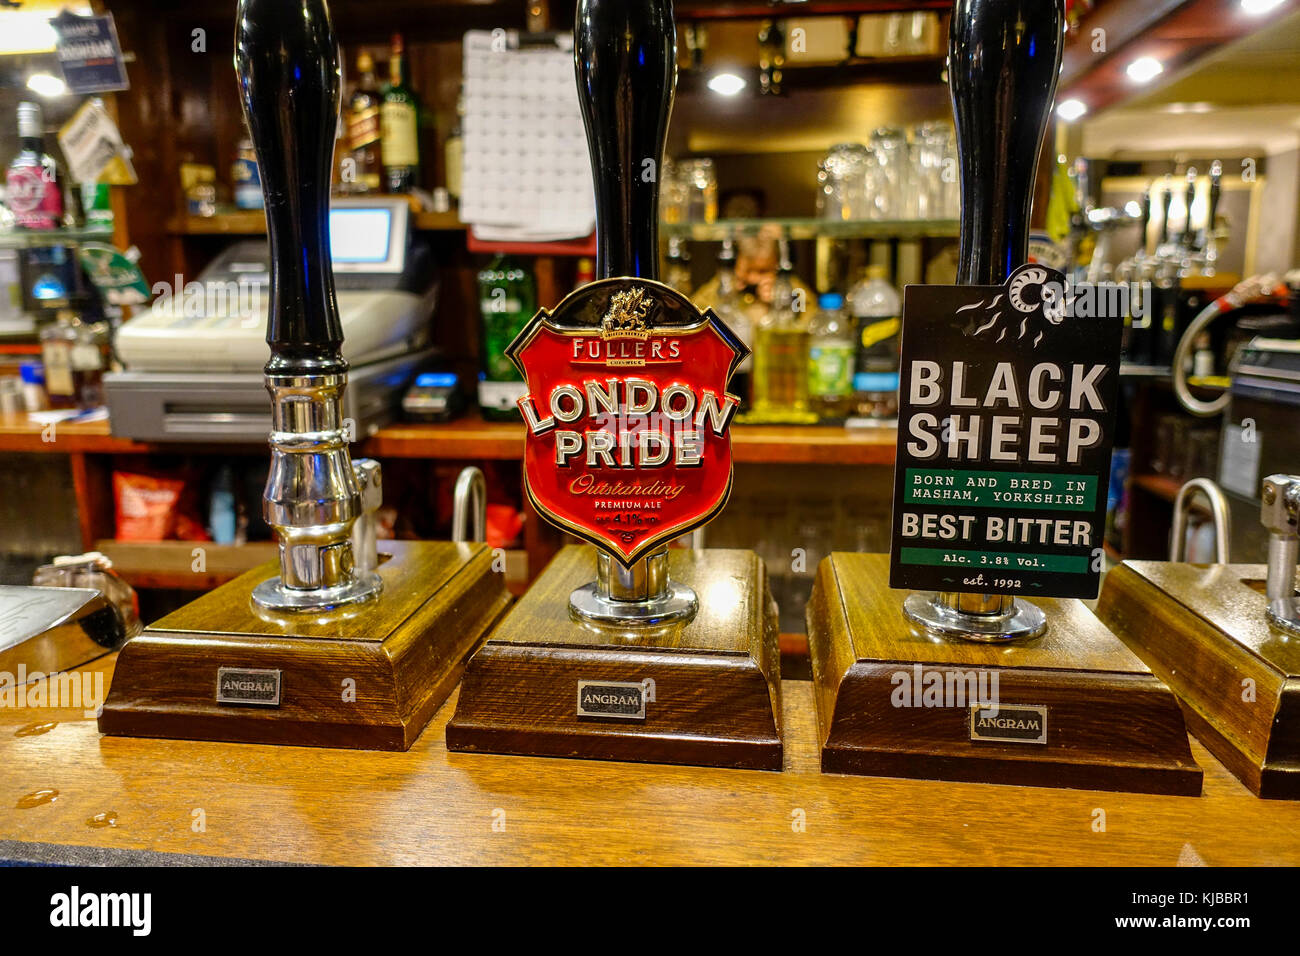 Public House, Beer Pumps, London Pride - The Eagle, Braintree Stock Photo